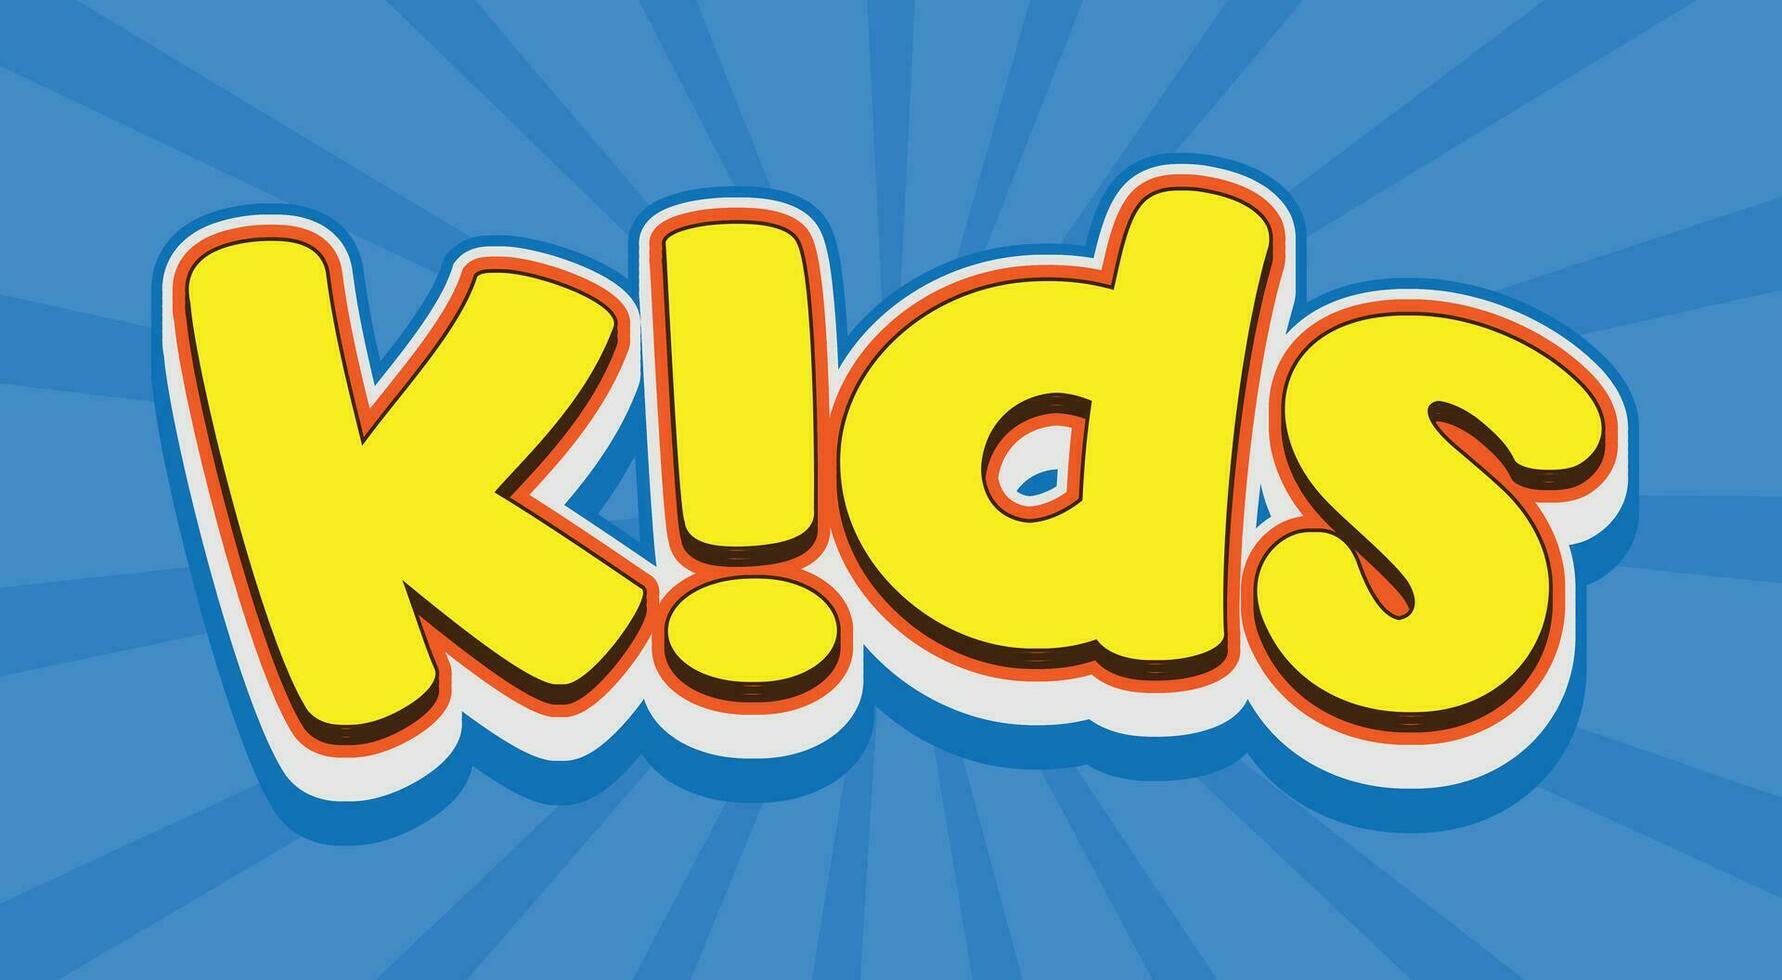 Kids typography with background vector